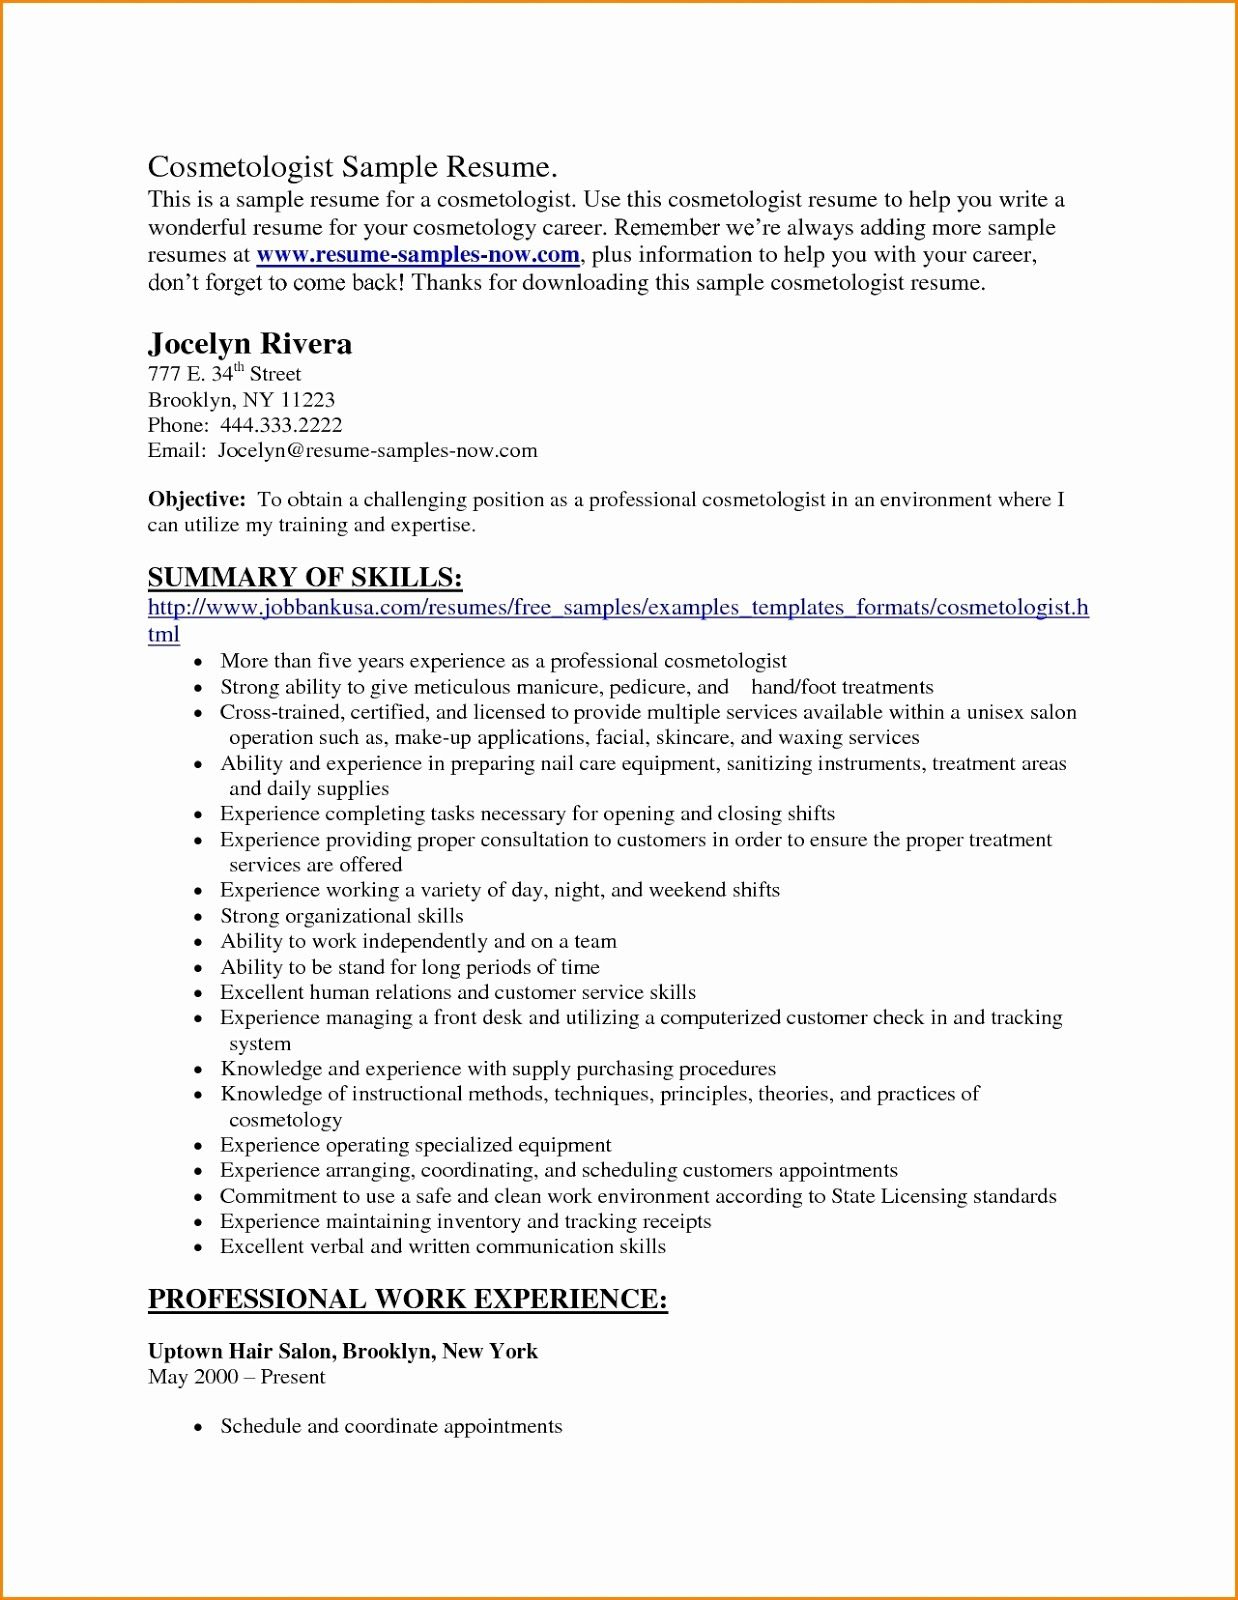 Cosmetologist Resume Example, Cosmetologist Resume regarding Cosmetologist Cover Letter Template